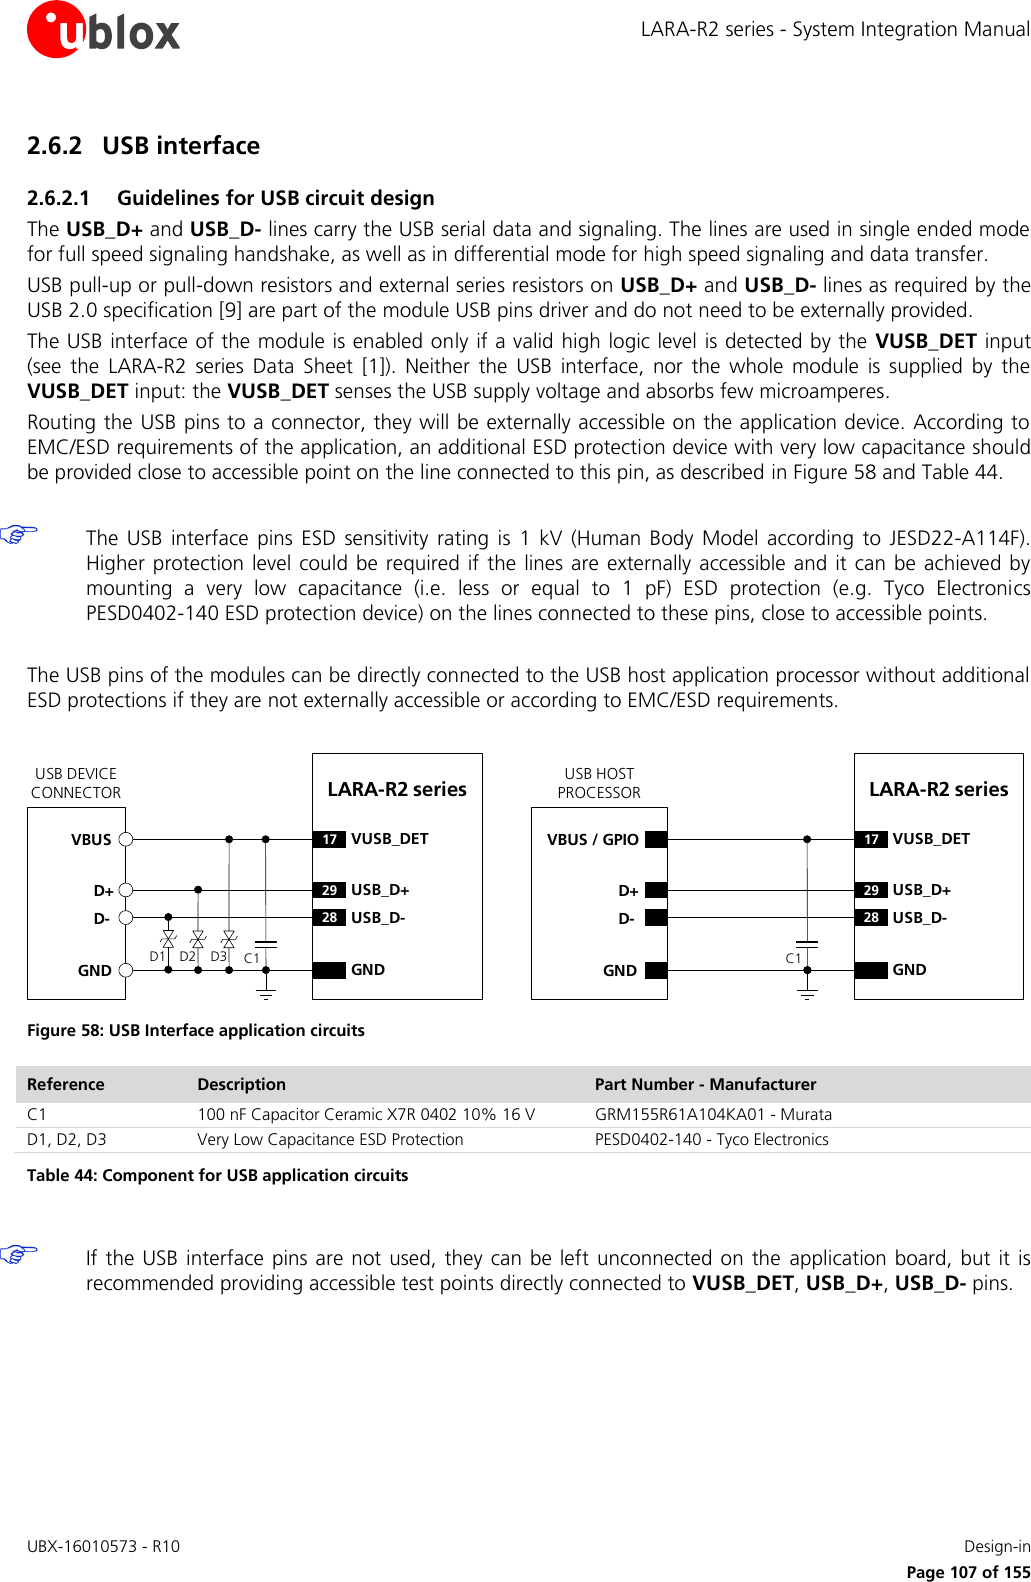 LARA-R2 series - System Integration Manual UBX-16010573 - R10    Design-in     Page 107 of 155 2.6.2 USB interface 2.6.2.1 Guidelines for USB circuit design The USB_D+ and USB_D- lines carry the USB serial data and signaling. The lines are used in single ended mode for full speed signaling handshake, as well as in differential mode for high speed signaling and data transfer. USB pull-up or pull-down resistors and external series resistors on USB_D+ and USB_D- lines as required by the USB 2.0 specification [9] are part of the module USB pins driver and do not need to be externally provided. The USB interface of the module is enabled only if a valid high logic level is detected by the  VUSB_DET input (see  the  LARA-R2  series Data  Sheet [1]).  Neither  the  USB  interface,  nor  the  whole  module  is  supplied  by  the VUSB_DET input: the VUSB_DET senses the USB supply voltage and absorbs few microamperes. Routing the USB pins to a connector, they will be externally accessible on the application device. According to EMC/ESD requirements of the application, an additional ESD protection device with very low capacitance should be provided close to accessible point on the line connected to this pin, as described in Figure 58 and Table 44.   The  USB  interface  pins  ESD  sensitivity  rating  is  1  kV  (Human Body  Model  according  to  JESD22-A114F). Higher protection level  could be required  if  the lines are externally accessible and it can  be  achieved by mounting  a  very  low  capacitance  (i.e.  less  or  equal  to  1  pF)  ESD  protection  (e.g.  Tyco  Electronics PESD0402-140 ESD protection device) on the lines connected to these pins, close to accessible points.  The USB pins of the modules can be directly connected to the USB host application processor without additional ESD protections if they are not externally accessible or according to EMC/ESD requirements.  LARA-R2 series D+D-GND29 USB_D+28 USB_D-GNDUSB DEVICE CONNECTORD1 D2VBUSC117 VUSB_DETLARA-R2 series D+D-GND29 USB_D+28 USB_D-GNDUSB HOST PROCESSORC117 VUSB_DETVBUS / GPIOD3 Figure 58: USB Interface application circuits Reference Description Part Number - Manufacturer C1 100 nF Capacitor Ceramic X7R 0402 10% 16 V GRM155R61A104KA01 - Murata D1, D2, D3 Very Low Capacitance ESD Protection PESD0402-140 - Tyco Electronics  Table 44: Component for USB application circuits   If the USB interface  pins are not used, they can  be  left unconnected on the  application board,  but  it is recommended providing accessible test points directly connected to VUSB_DET, USB_D+, USB_D- pins.  